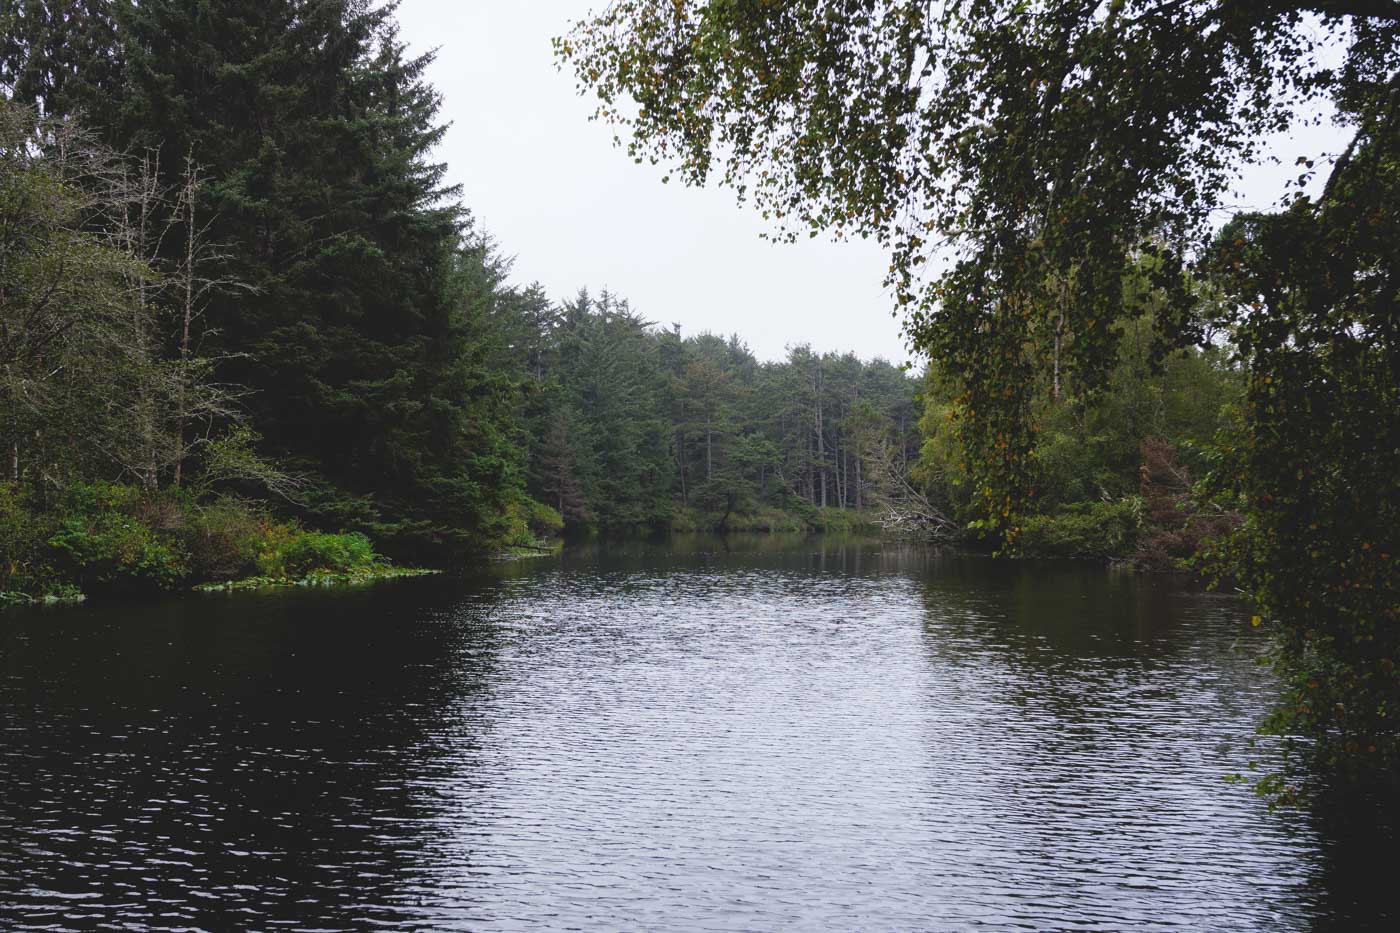 A lake surrounded by trees and forests in Beaver Creek State Natural Area.